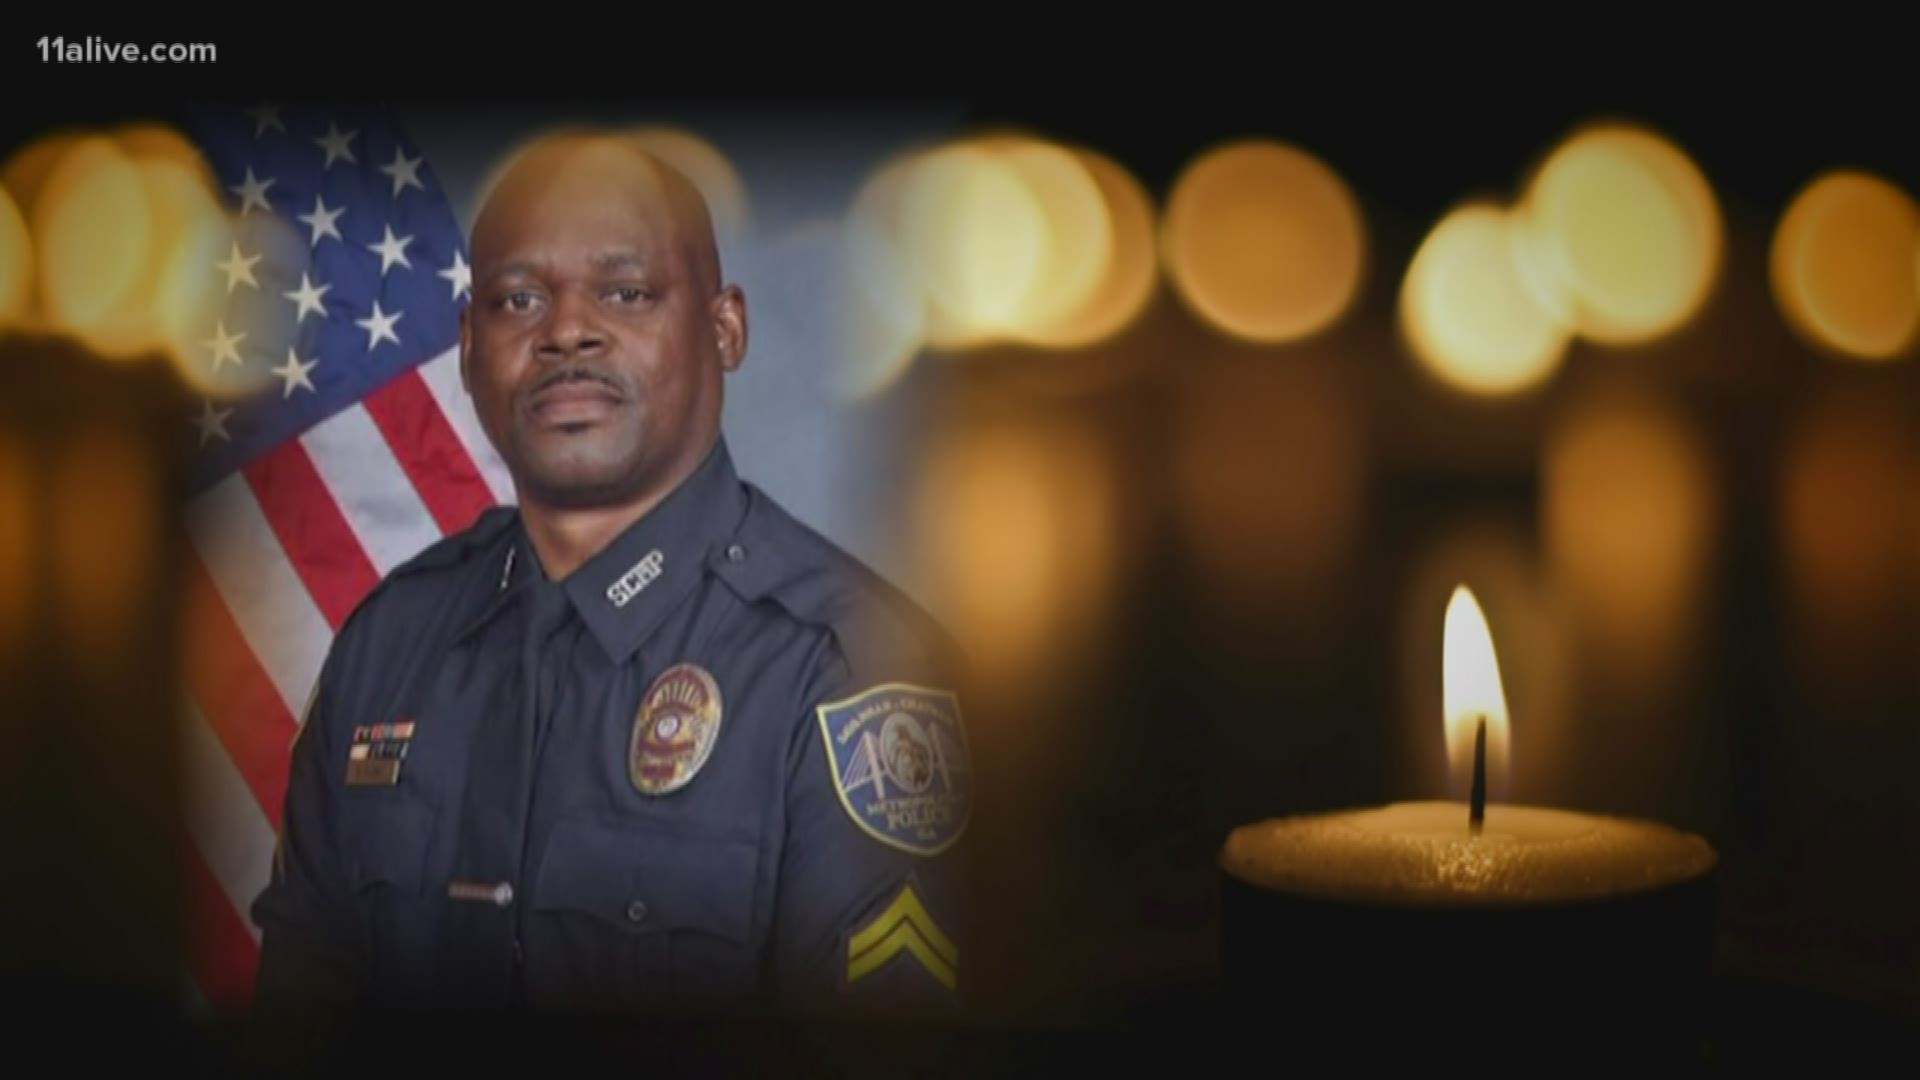 A Savannah Police officer was shot and killed in the line of duty. He was a 10 year veteran and served in the army for 2 decades.